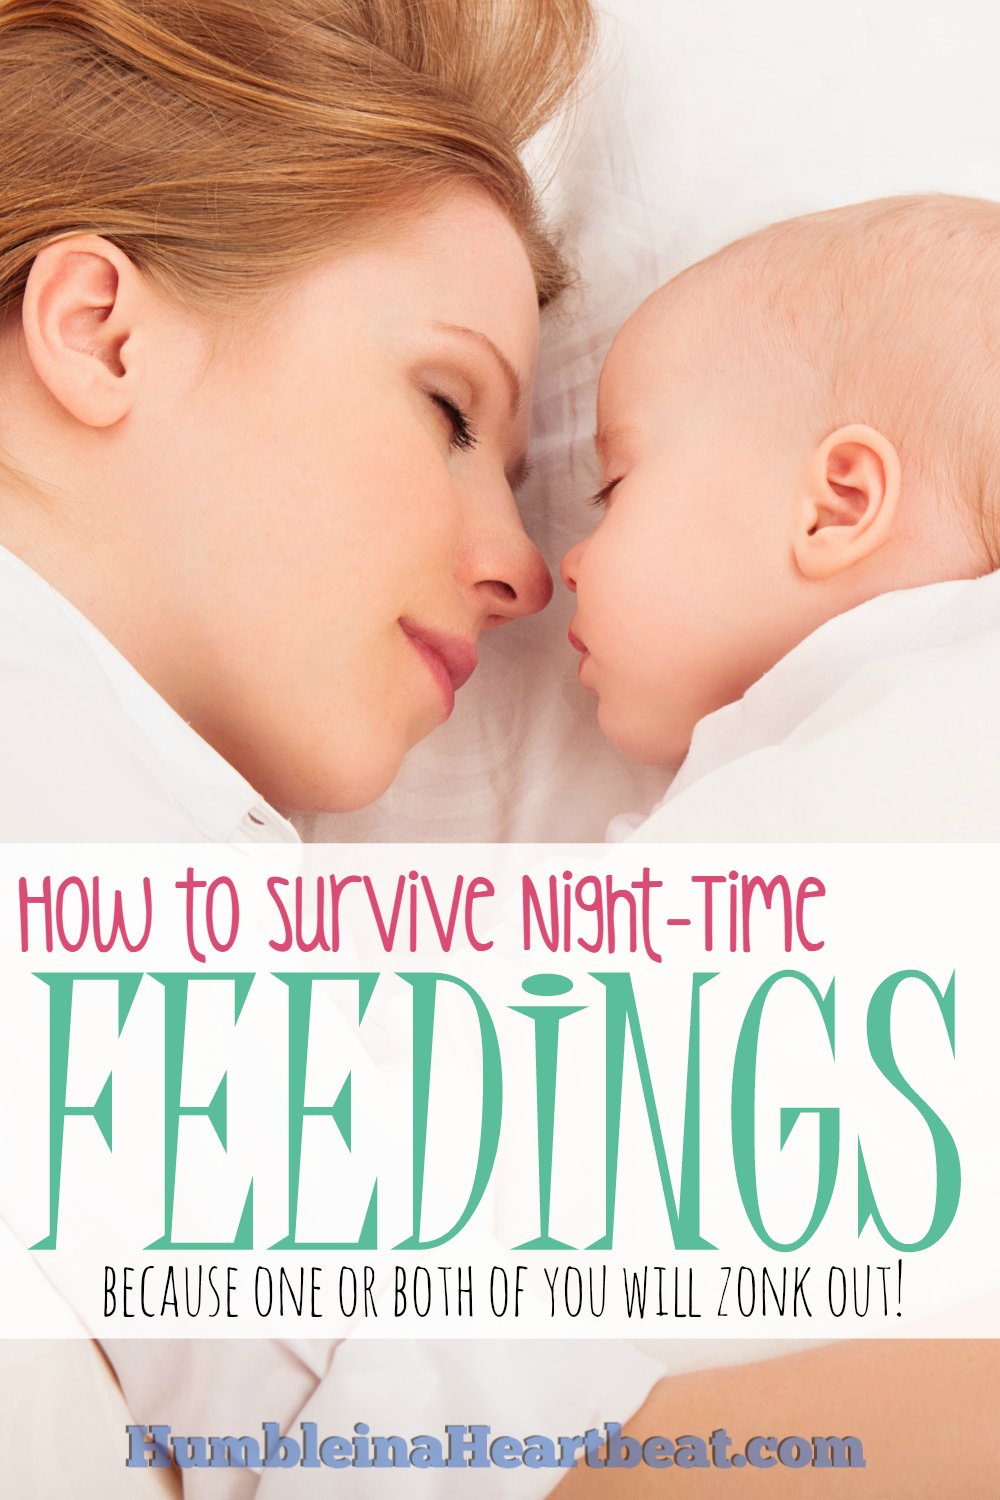 Feeding a baby in the middle of the night is pretty torturous. If you're not really prepared, you might end up falling asleep with baby in your arms and wonder if you even fed your baby when morning comes. Come, read these tips, and hopefully you can better survive this season of your life!